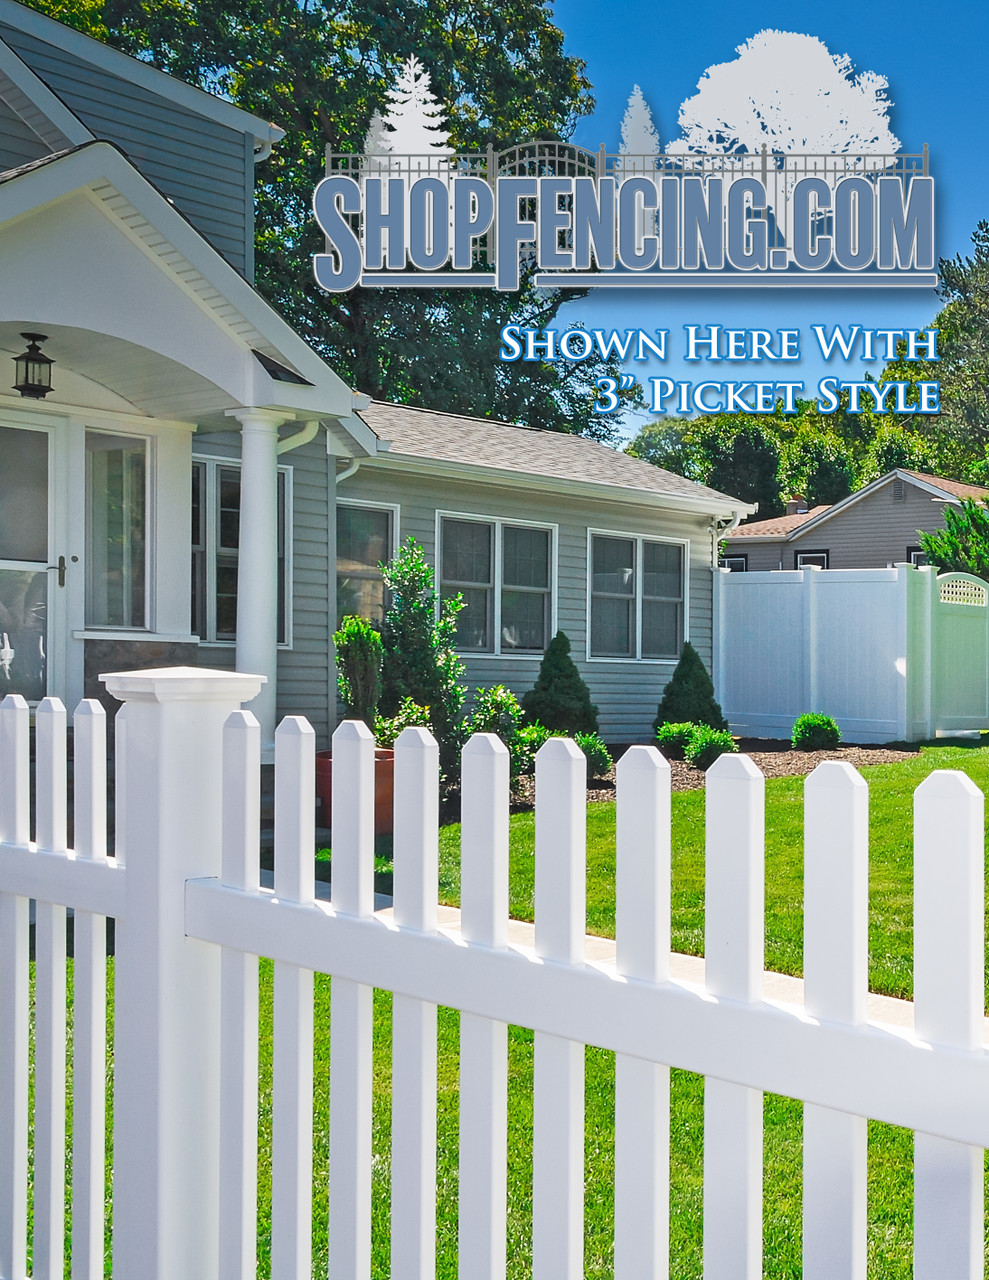 Vinyl Picket Fence Sections from Shopfencing.com with 3 Inch Pickets